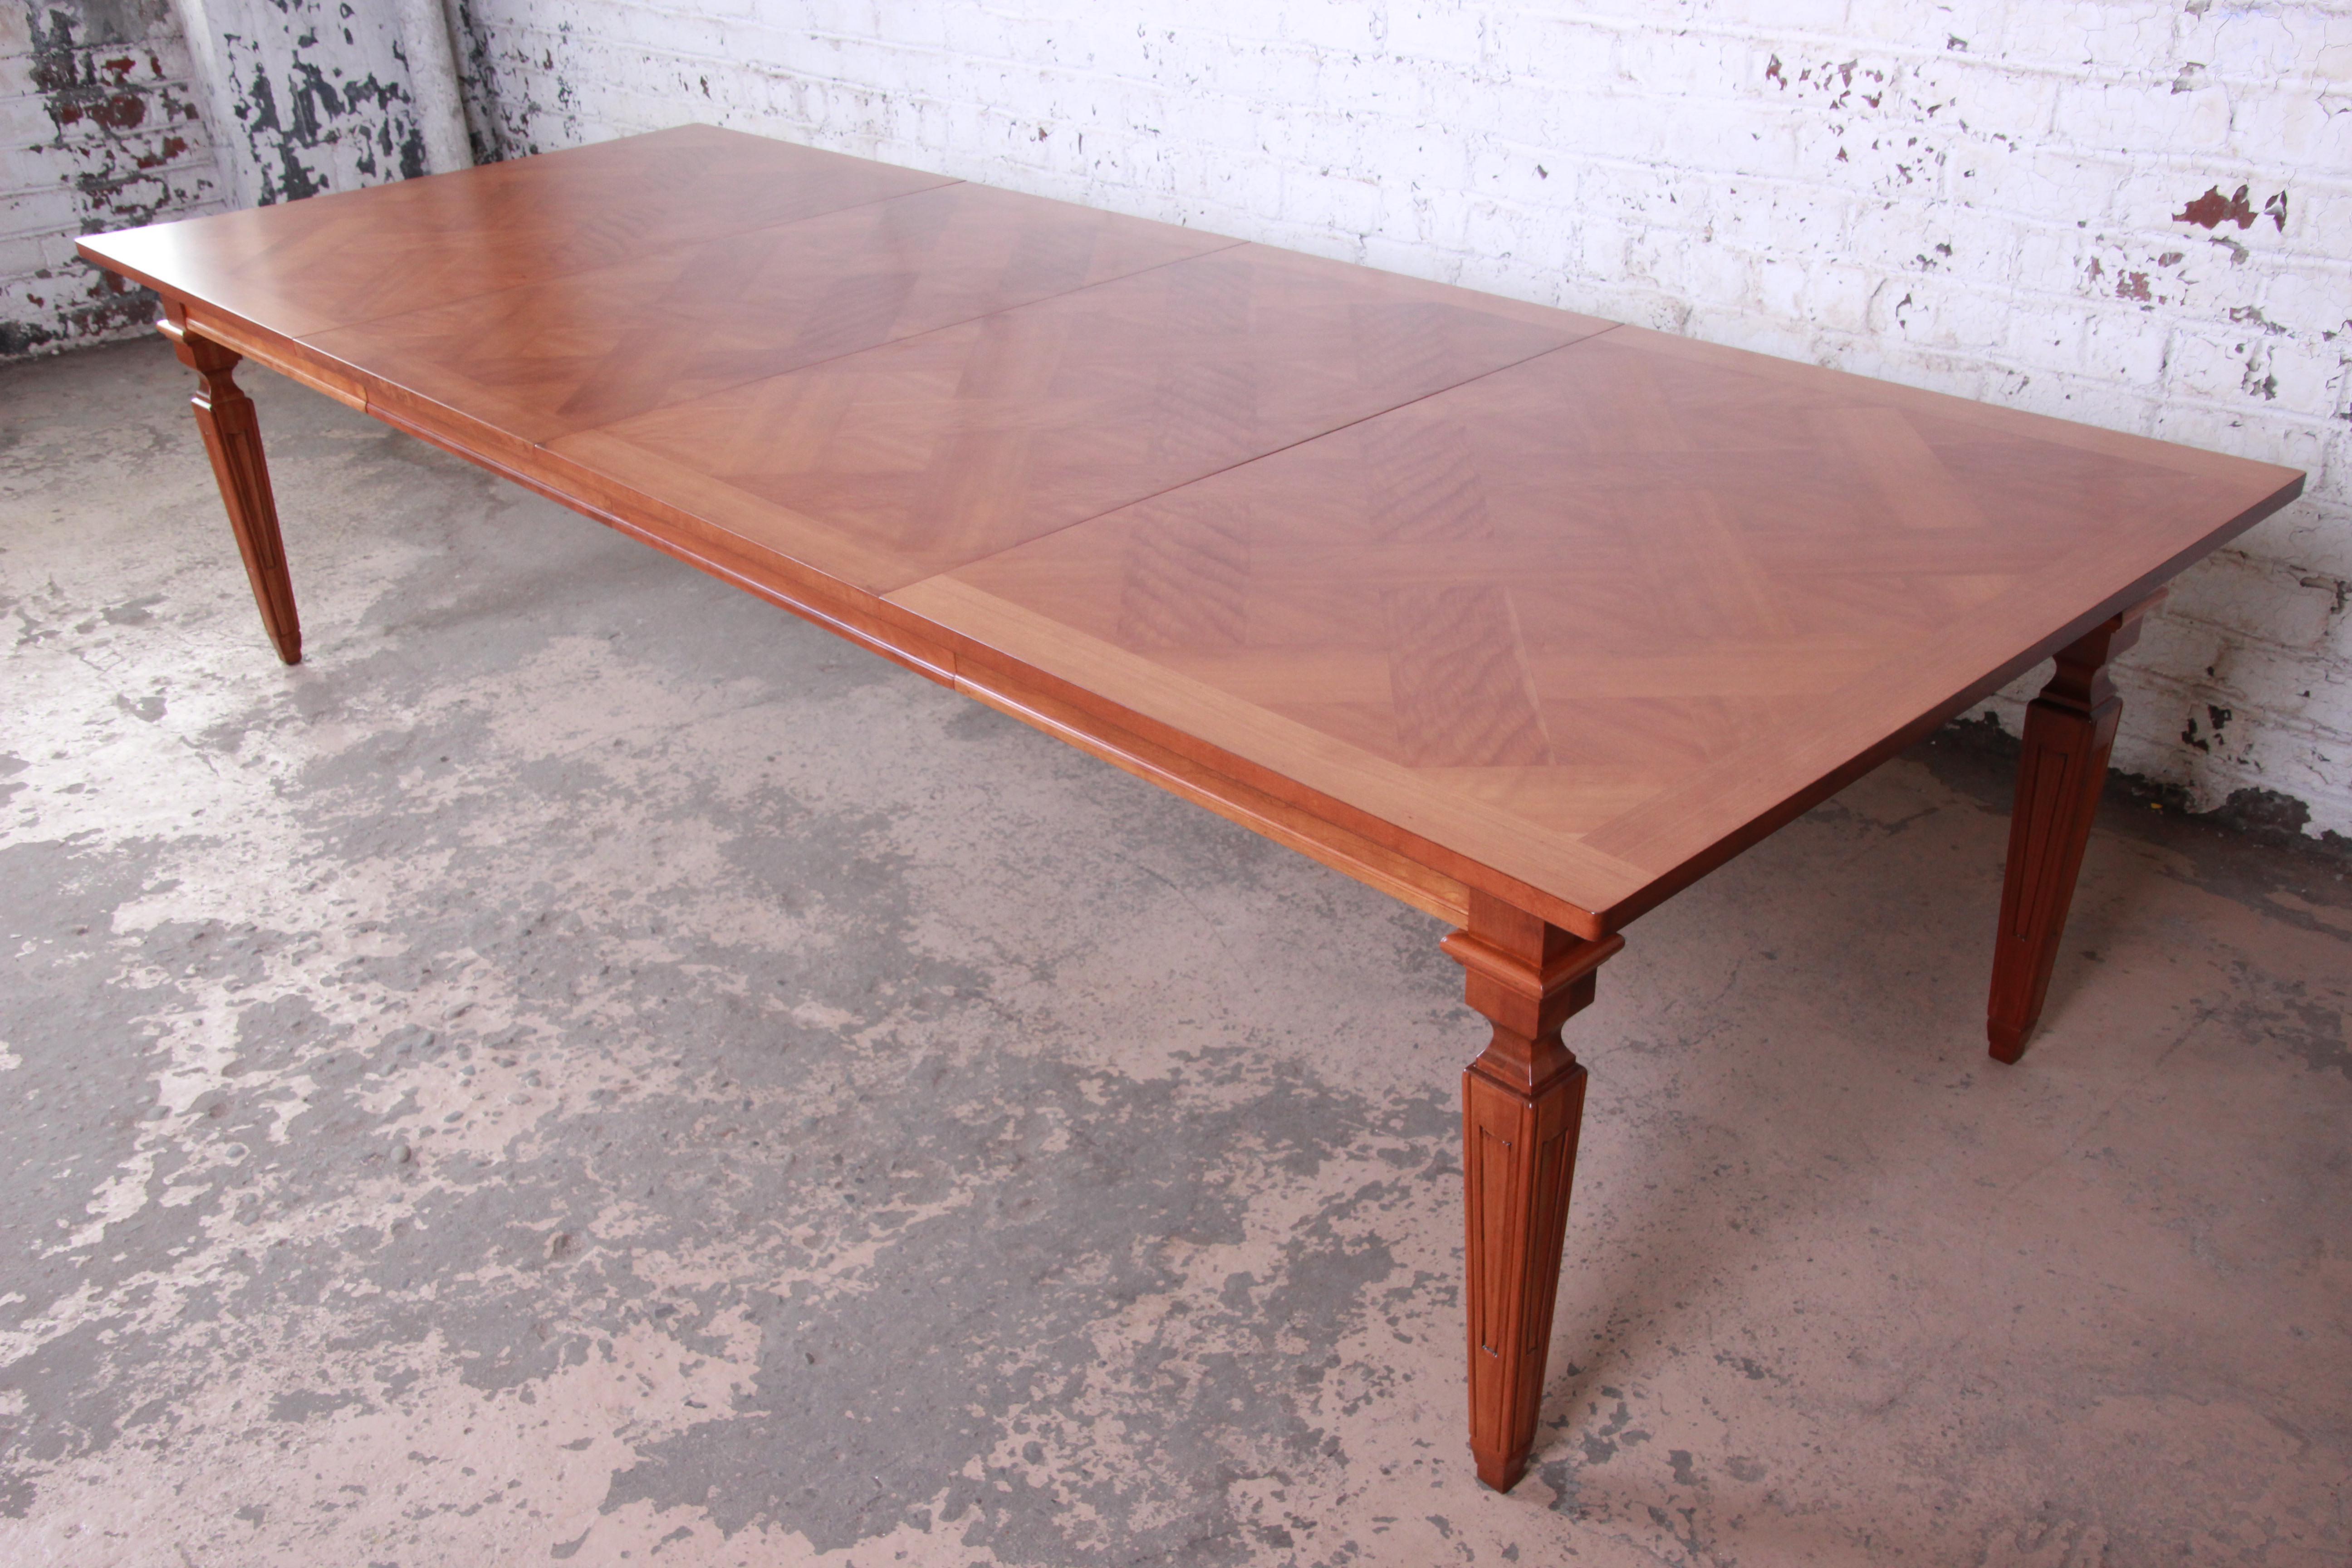 A gorgeous newly restored French Regency extension dining table by Baker Furniture. The table features a nice parquetry top and beautiful cherrywood grain. With two large 26.5